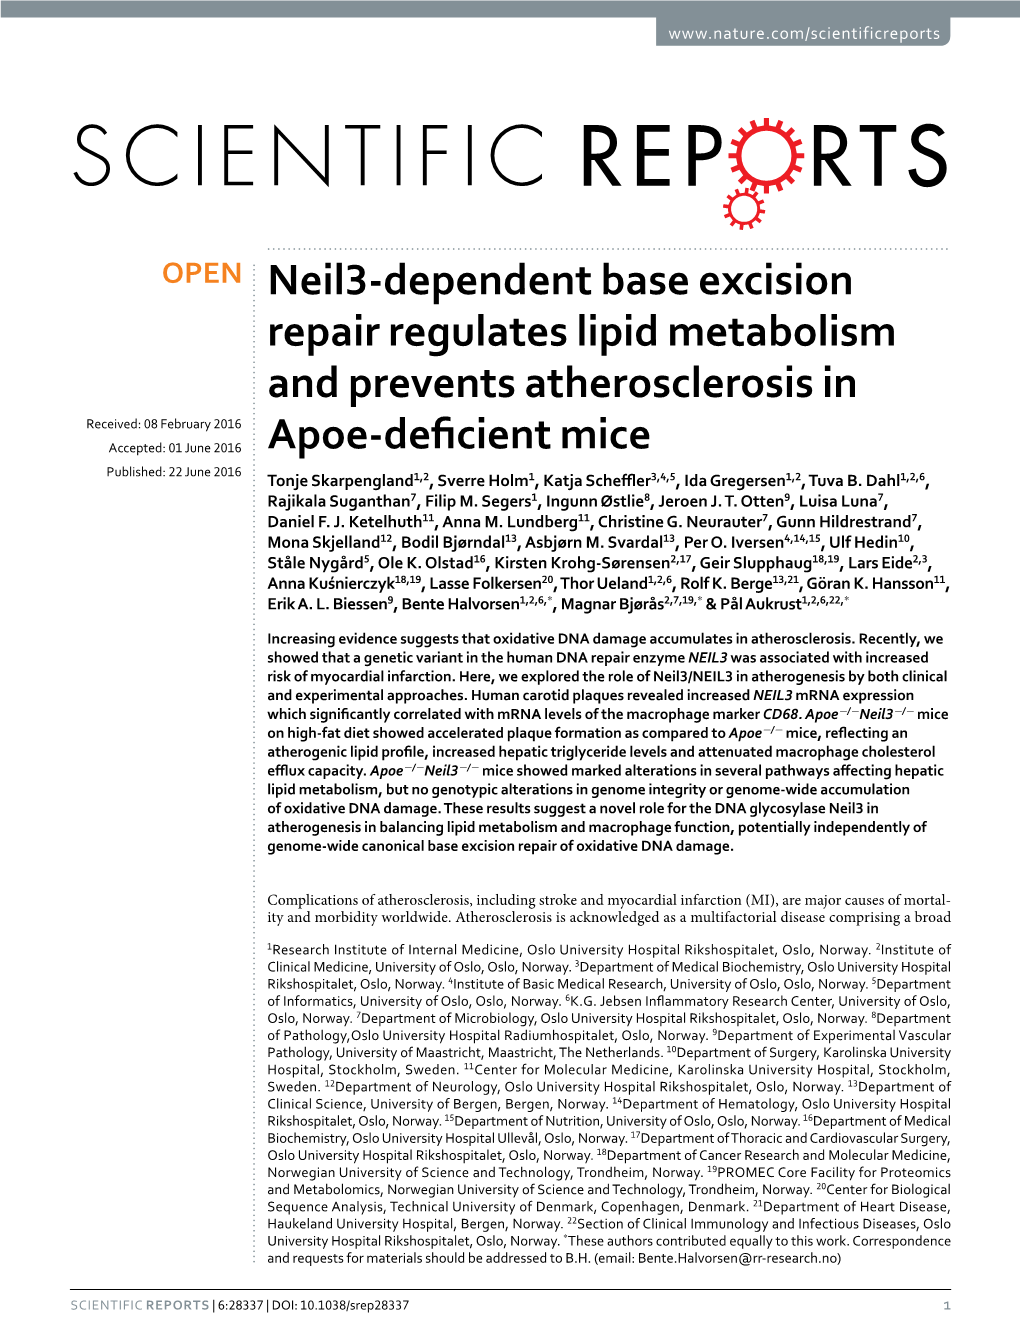 Neil3-Dependent Base Excision Repair Regulates Lipid Metabolism And